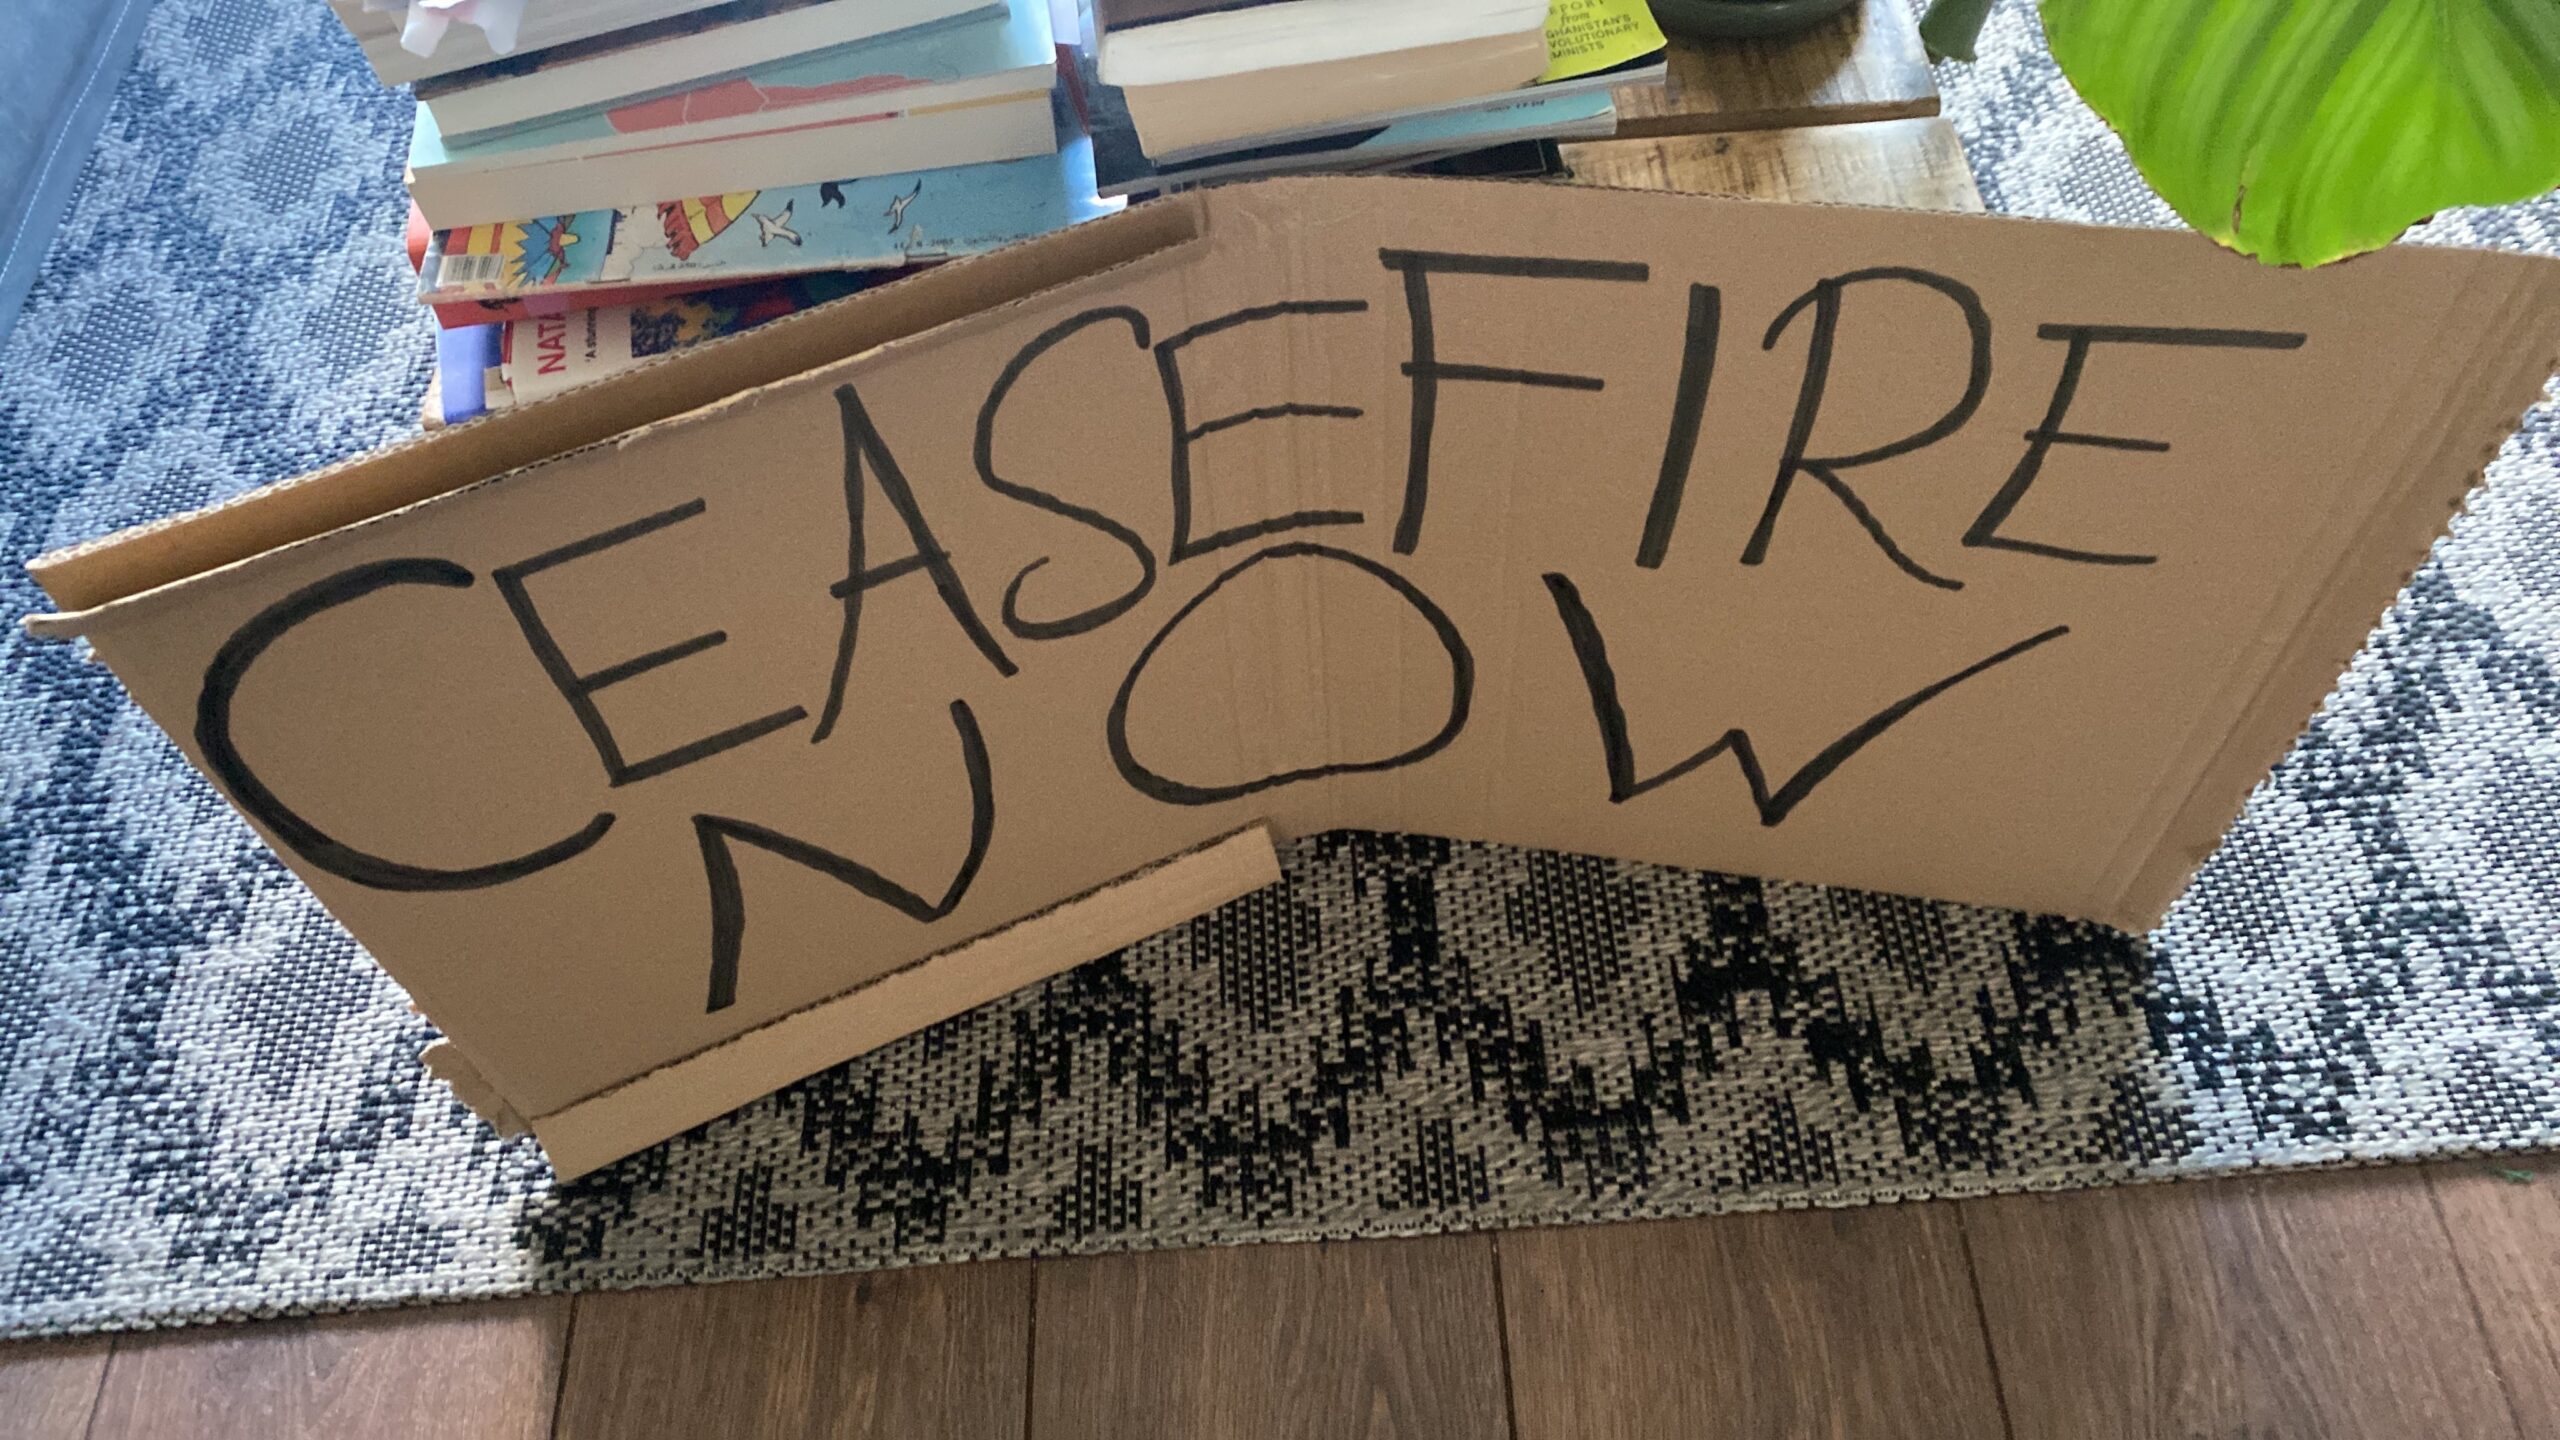 A cardboard sign, saying "ceasefire now" in capital letters. It leans against a table full of books.